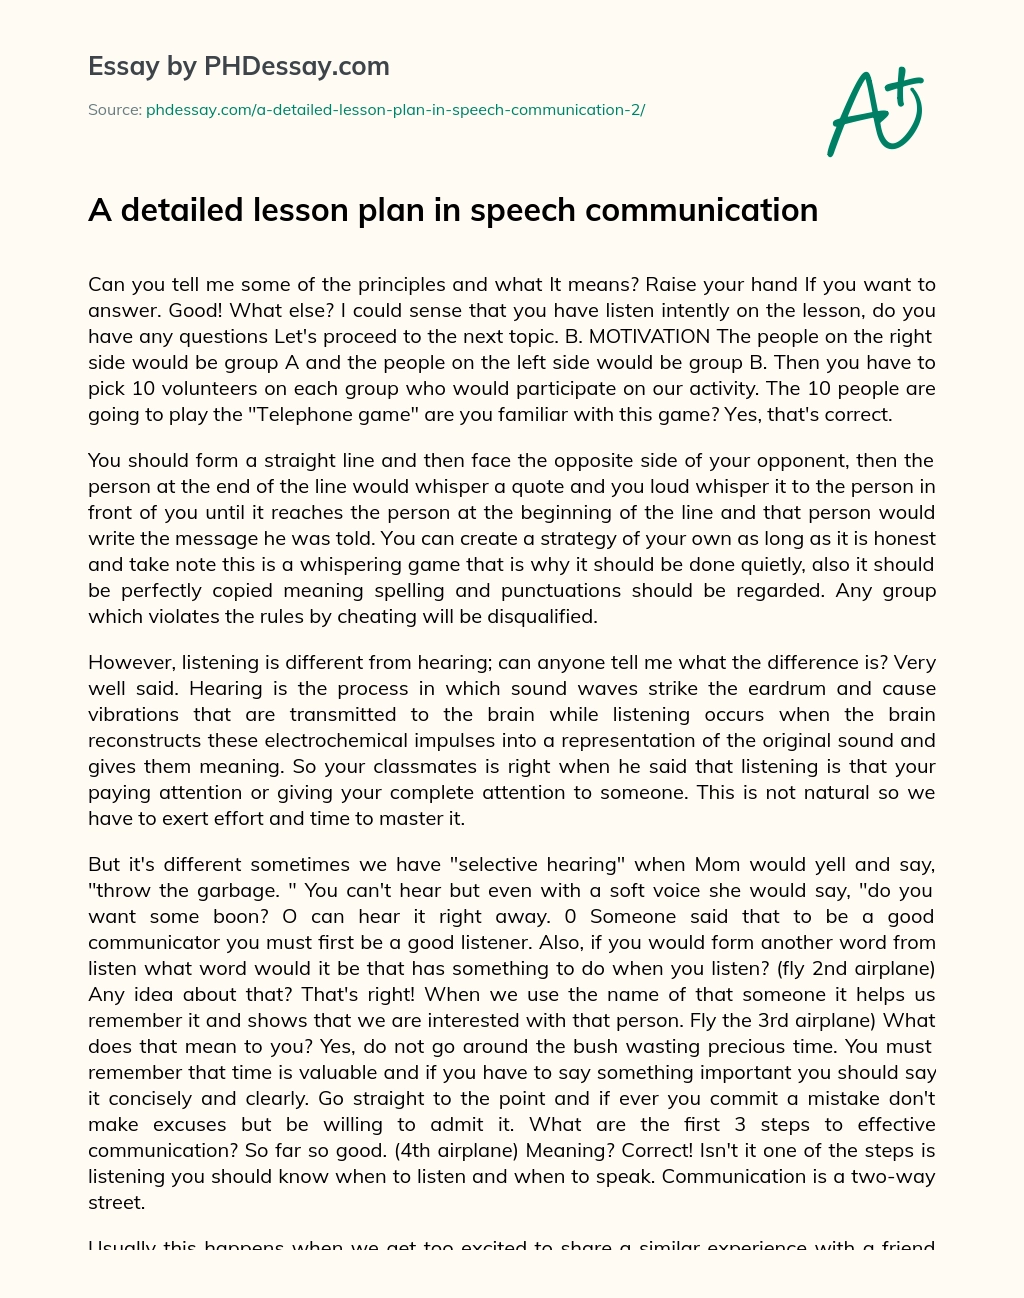 A detailed  lesson plan in speech communication essay